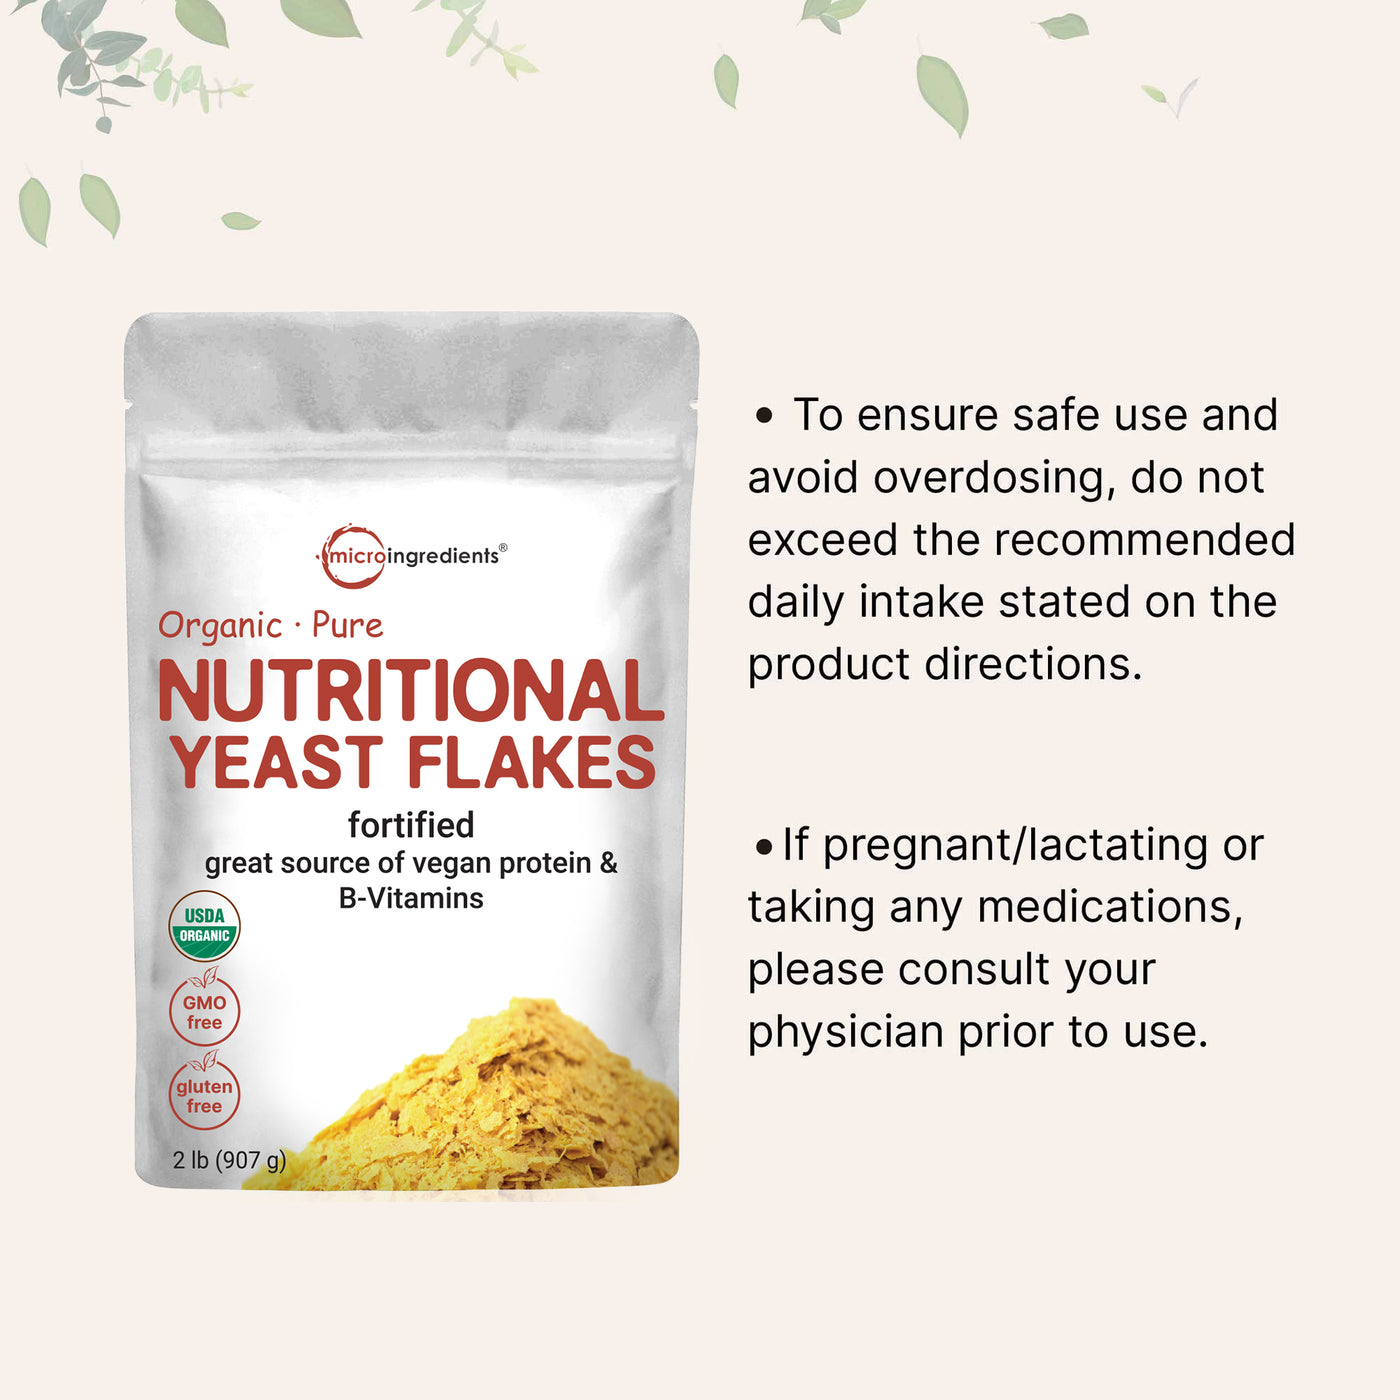 Organic Fortified Nutritional Yeast Flakes - Gluten Free To ensure safe use andavoid overdosing, do notexceed the recommendeddaily intake stated on theproduct directions. lf pregnant/lactating ortaking any medicationsplease consult yourphysician prior to use